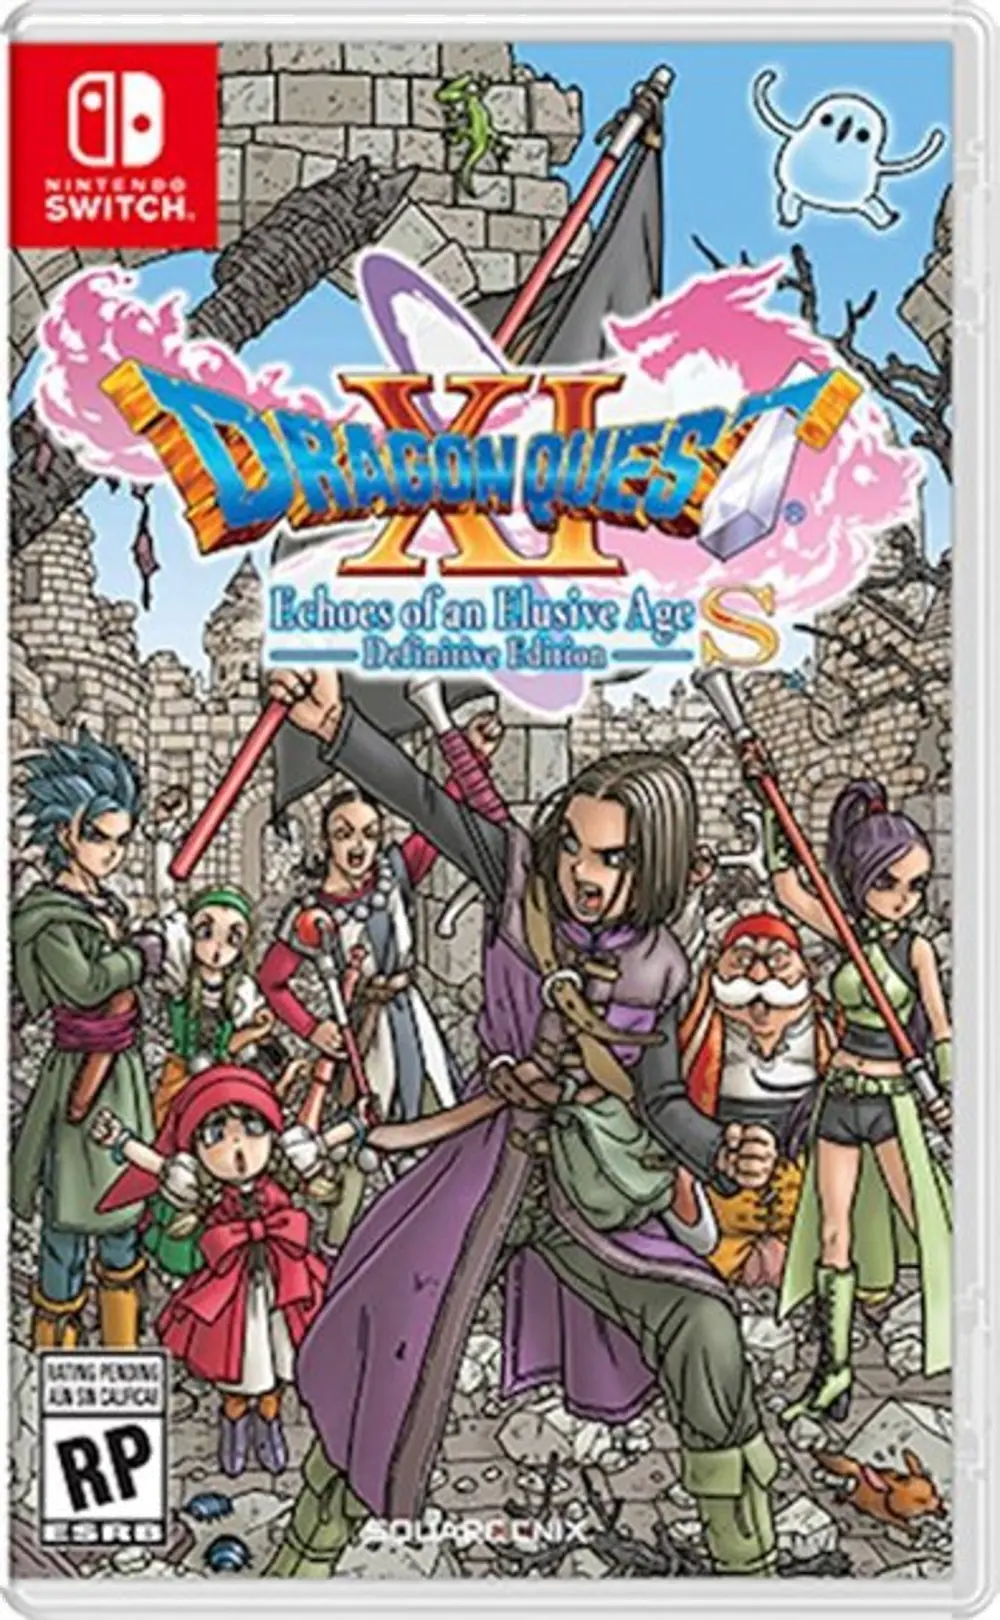 SWI 108400 Dragon Quest XI: Echoes of an Elusive Age - Nintendo Switch-1